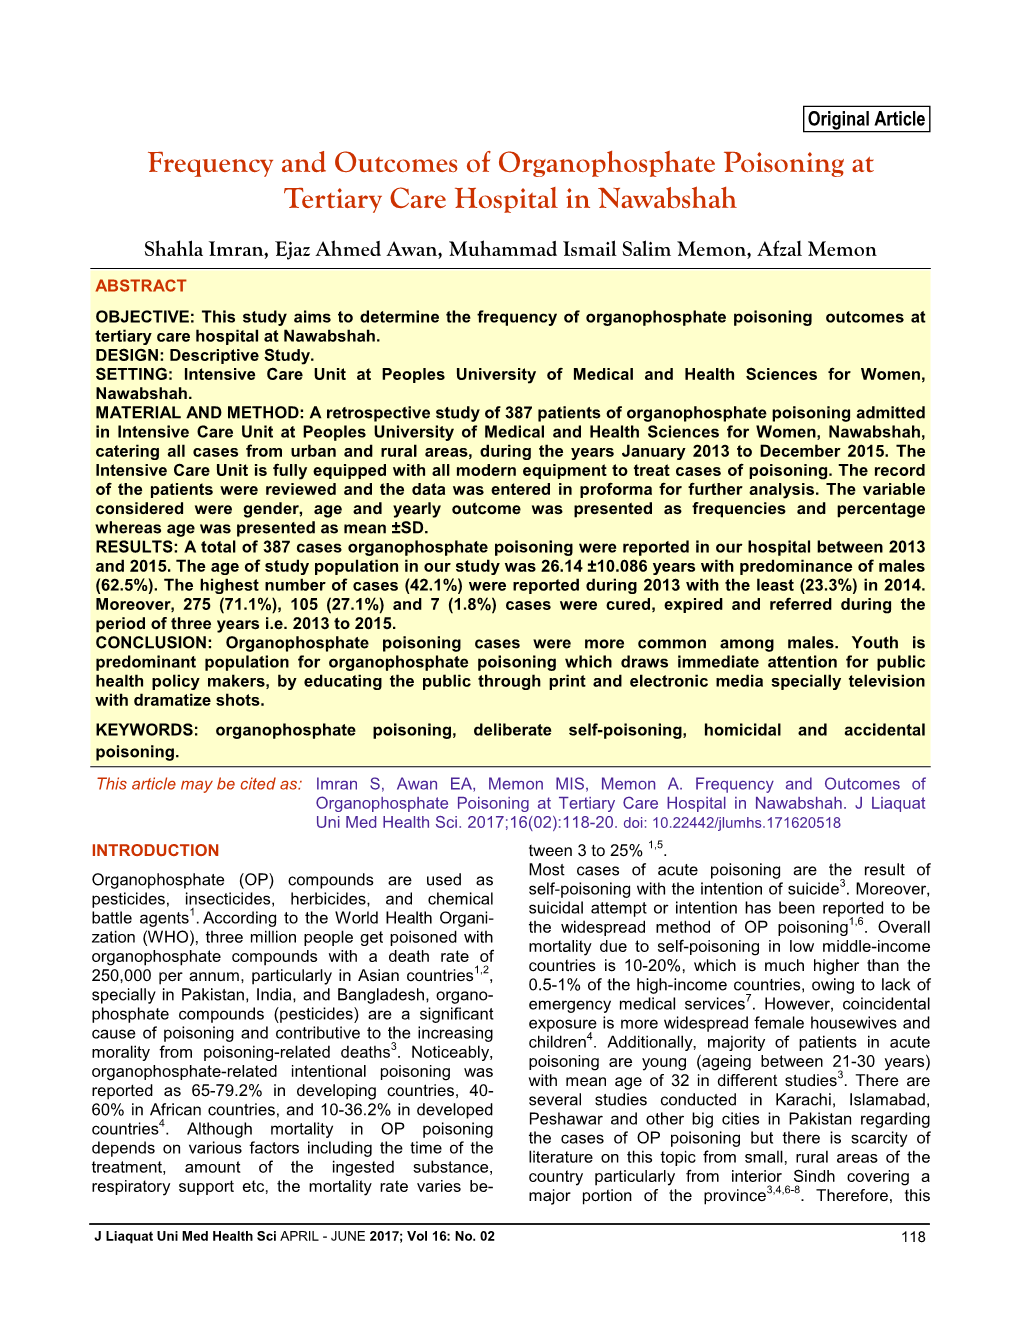 Frequency and Outcomes of Organophosphate Poisoning at Tertiary Care Hospital in Nawabshah